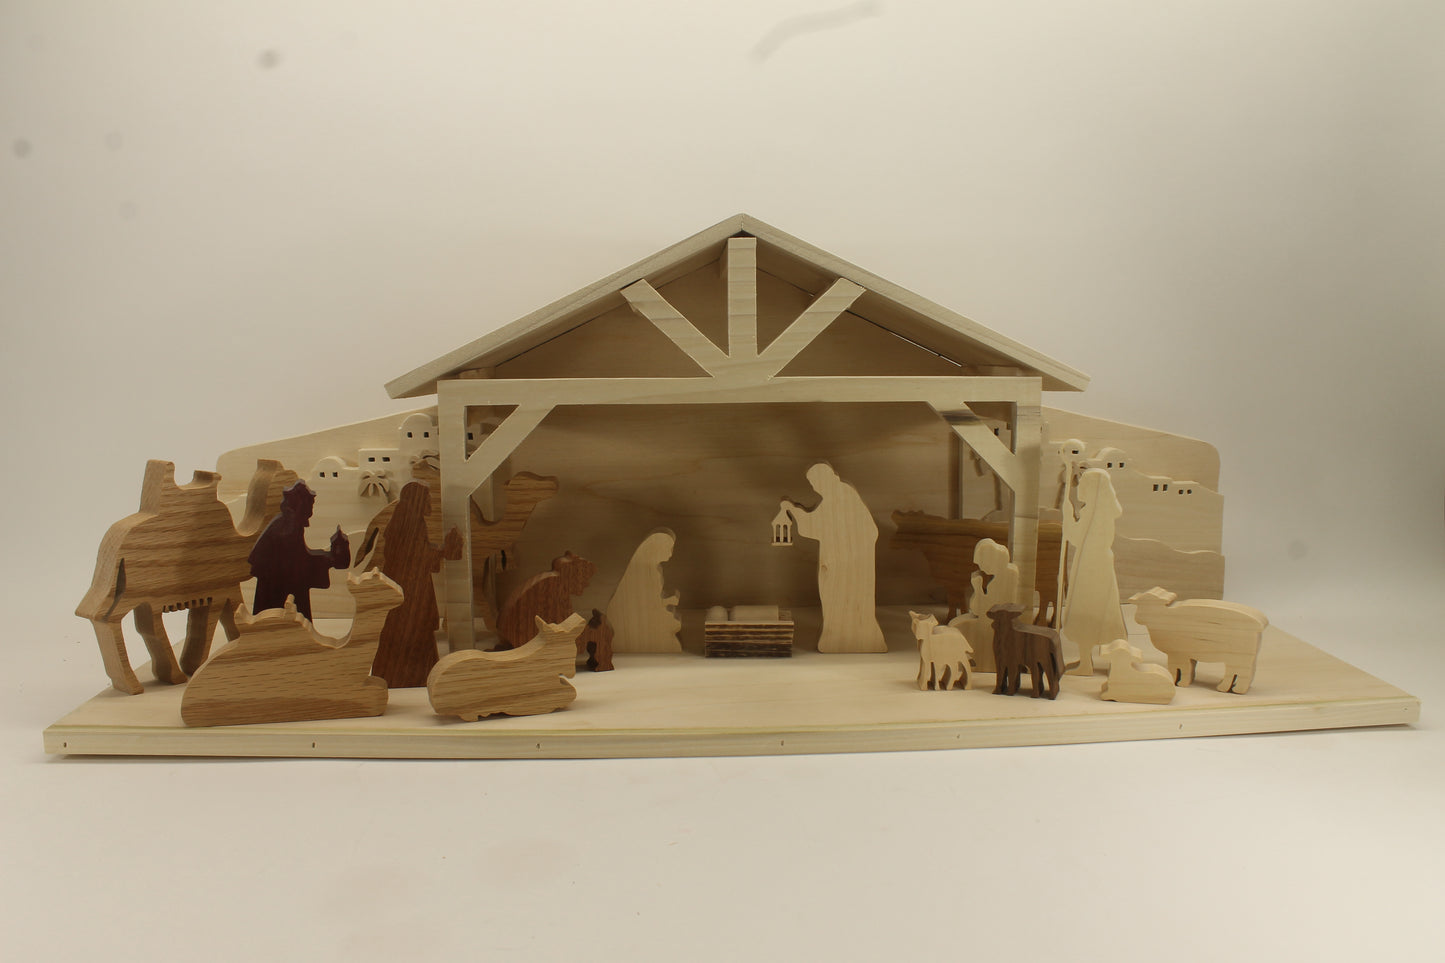 Multi-piece wood nativity with stable and figures, town of Bethlehem in the background